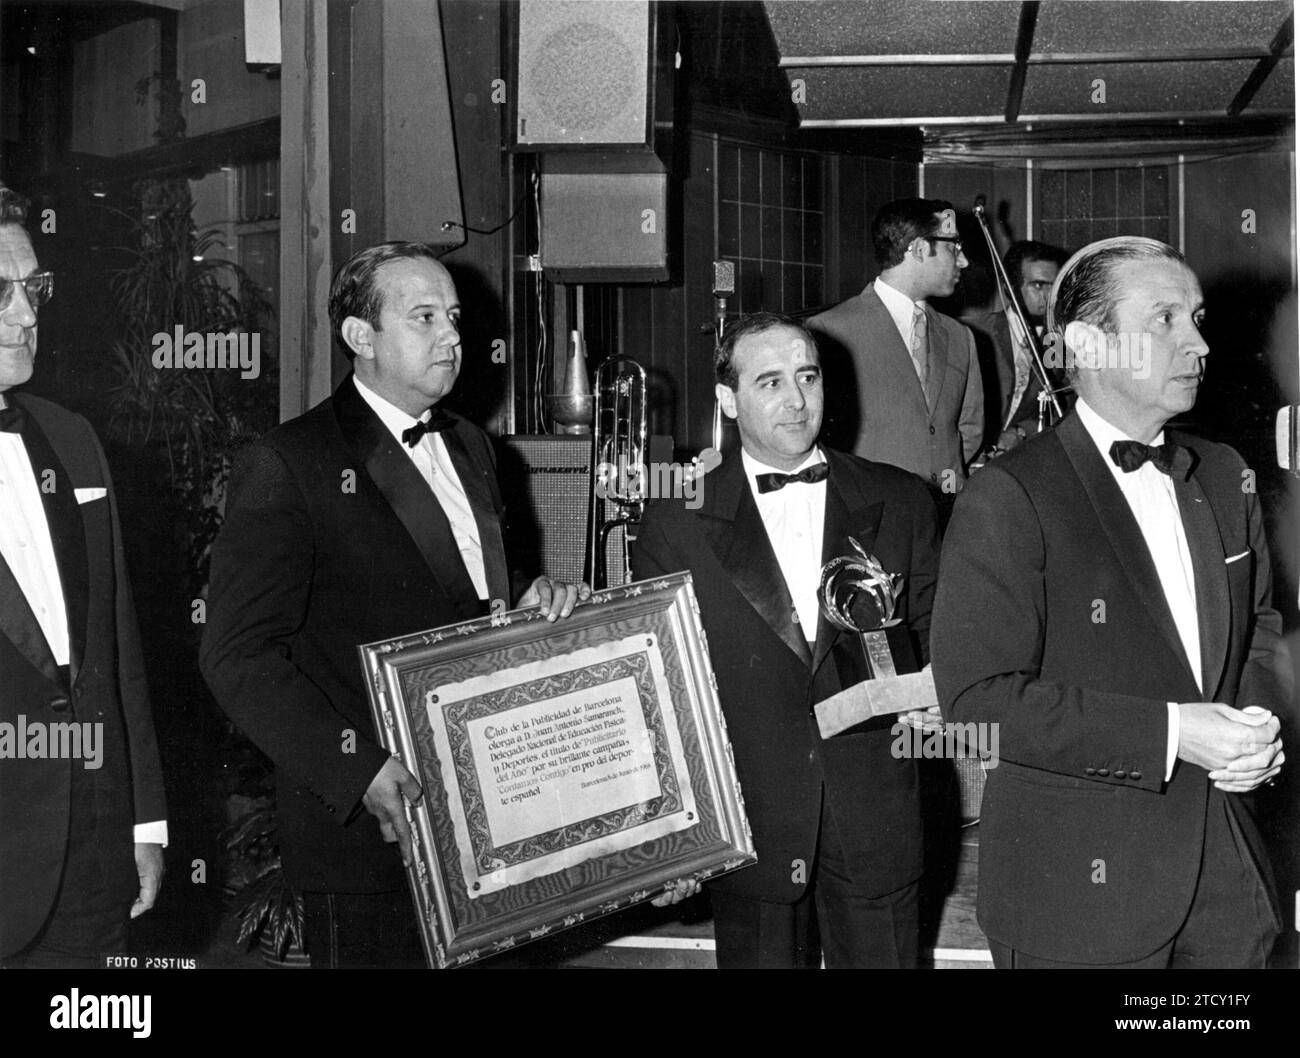 06/07/1968. During a gala dinner held in Barcelona and organized by the Advertising Club, the trophy and diploma of the 'best advertising of the year' by Juan Antonio Samaranch was presented to the national delegate of physical education and sports, Mr. Juan Antonio Samaranch. his brilliant 'We Count on You' Campaign in favor of Spanish sport. In the photo, Mr. Samaranch giving thanks for the distinction while two of his collaborators hold the trophy and the diploma. Credit: Album / Archivo ABC Stock Photo